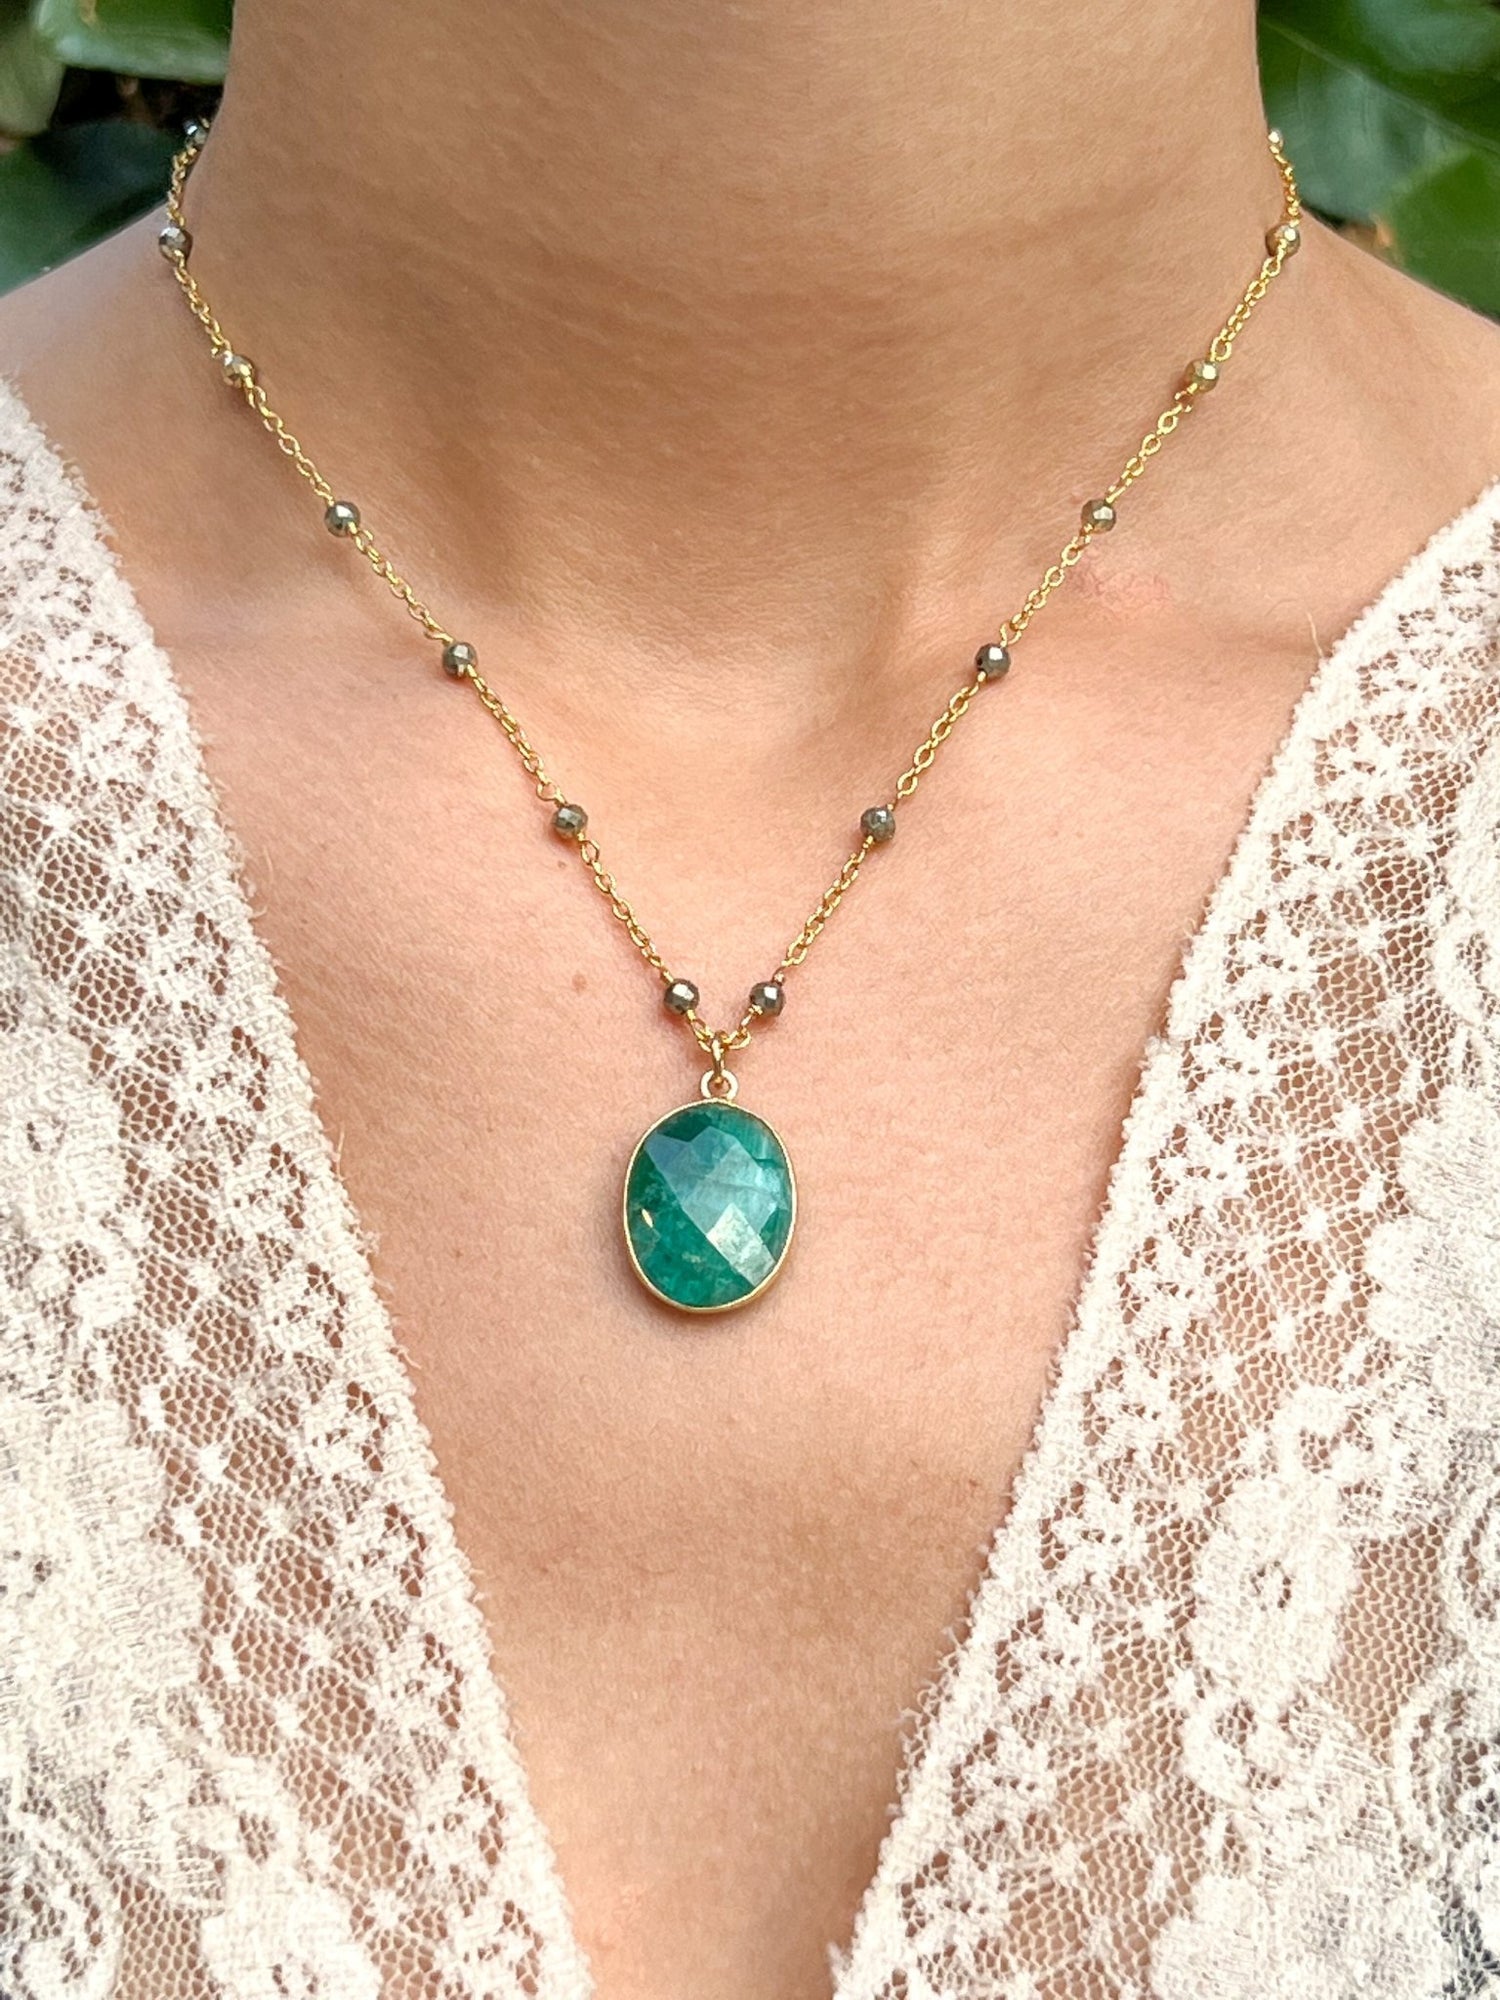 Raw Emerald Large Oval Pendant Necklace on Gold Chain with Golden Pyrite by Sage Machado - The Sage Lifestyle